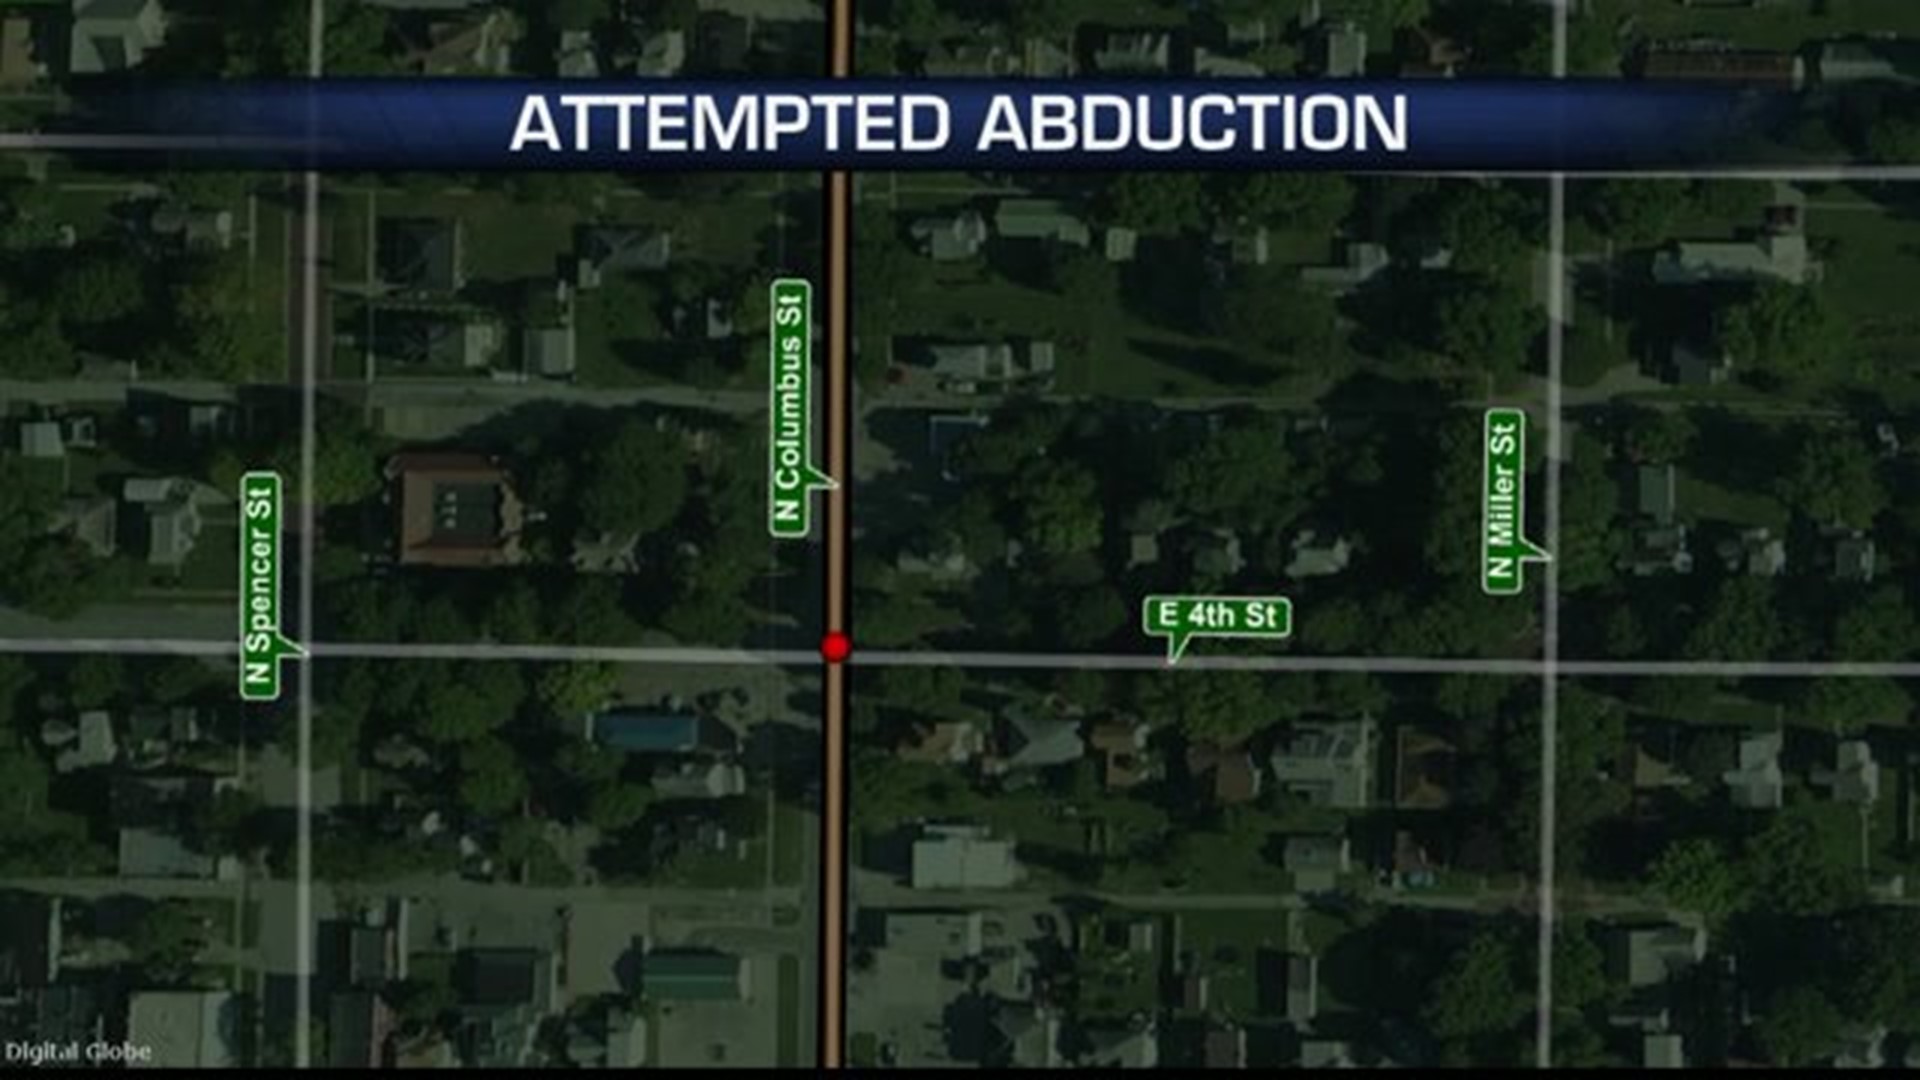 West Libery Attempted Abduction